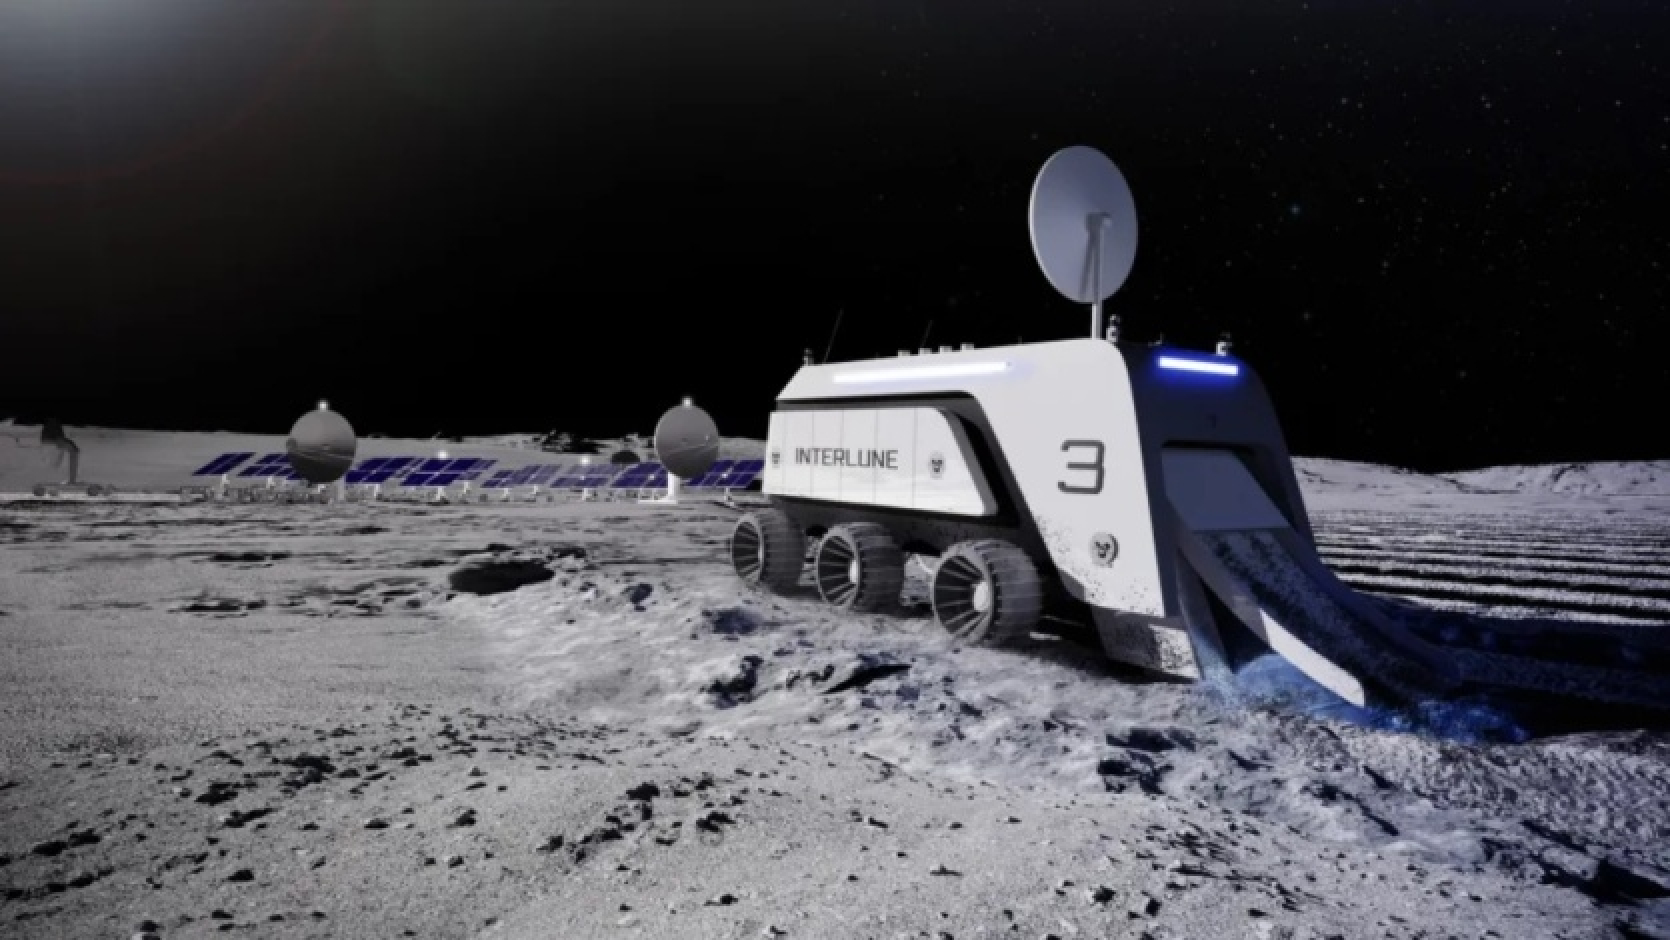 Interlune wants to mine Helium-3 on the moon by 2030 - it's a potential fuel for nuclear fusion